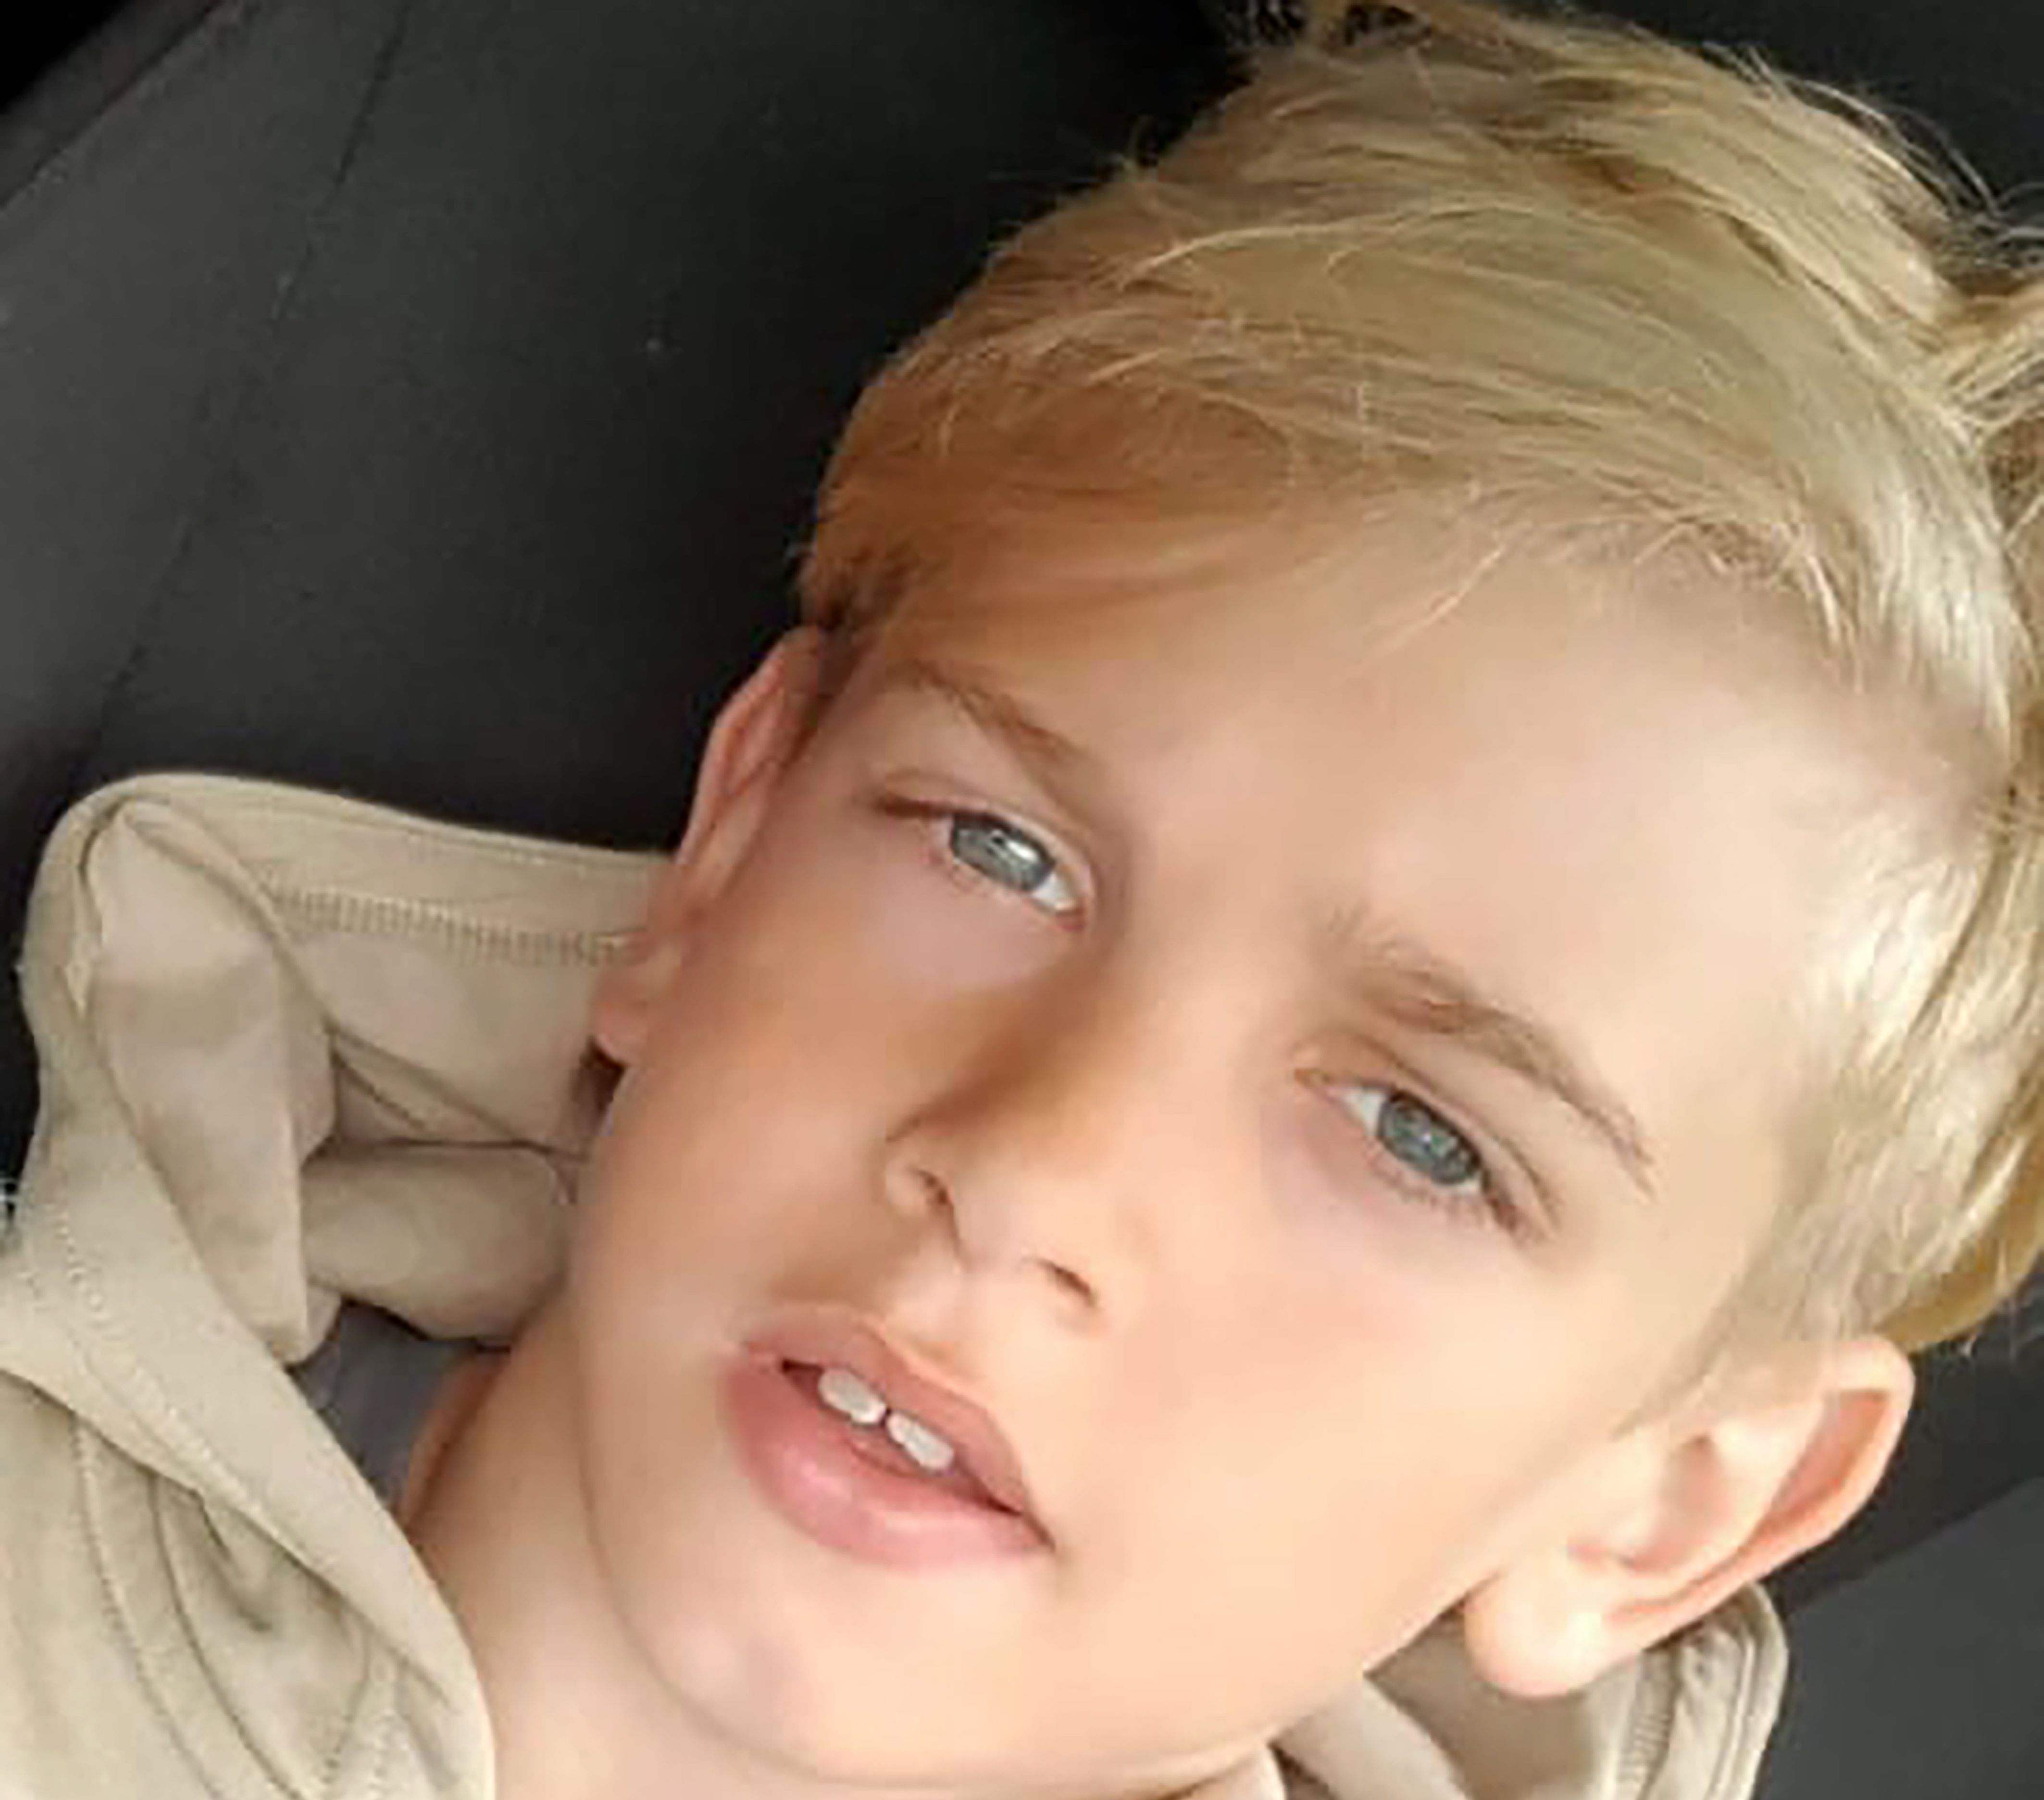 12-year-old Archie Battersbee remains on life-support.